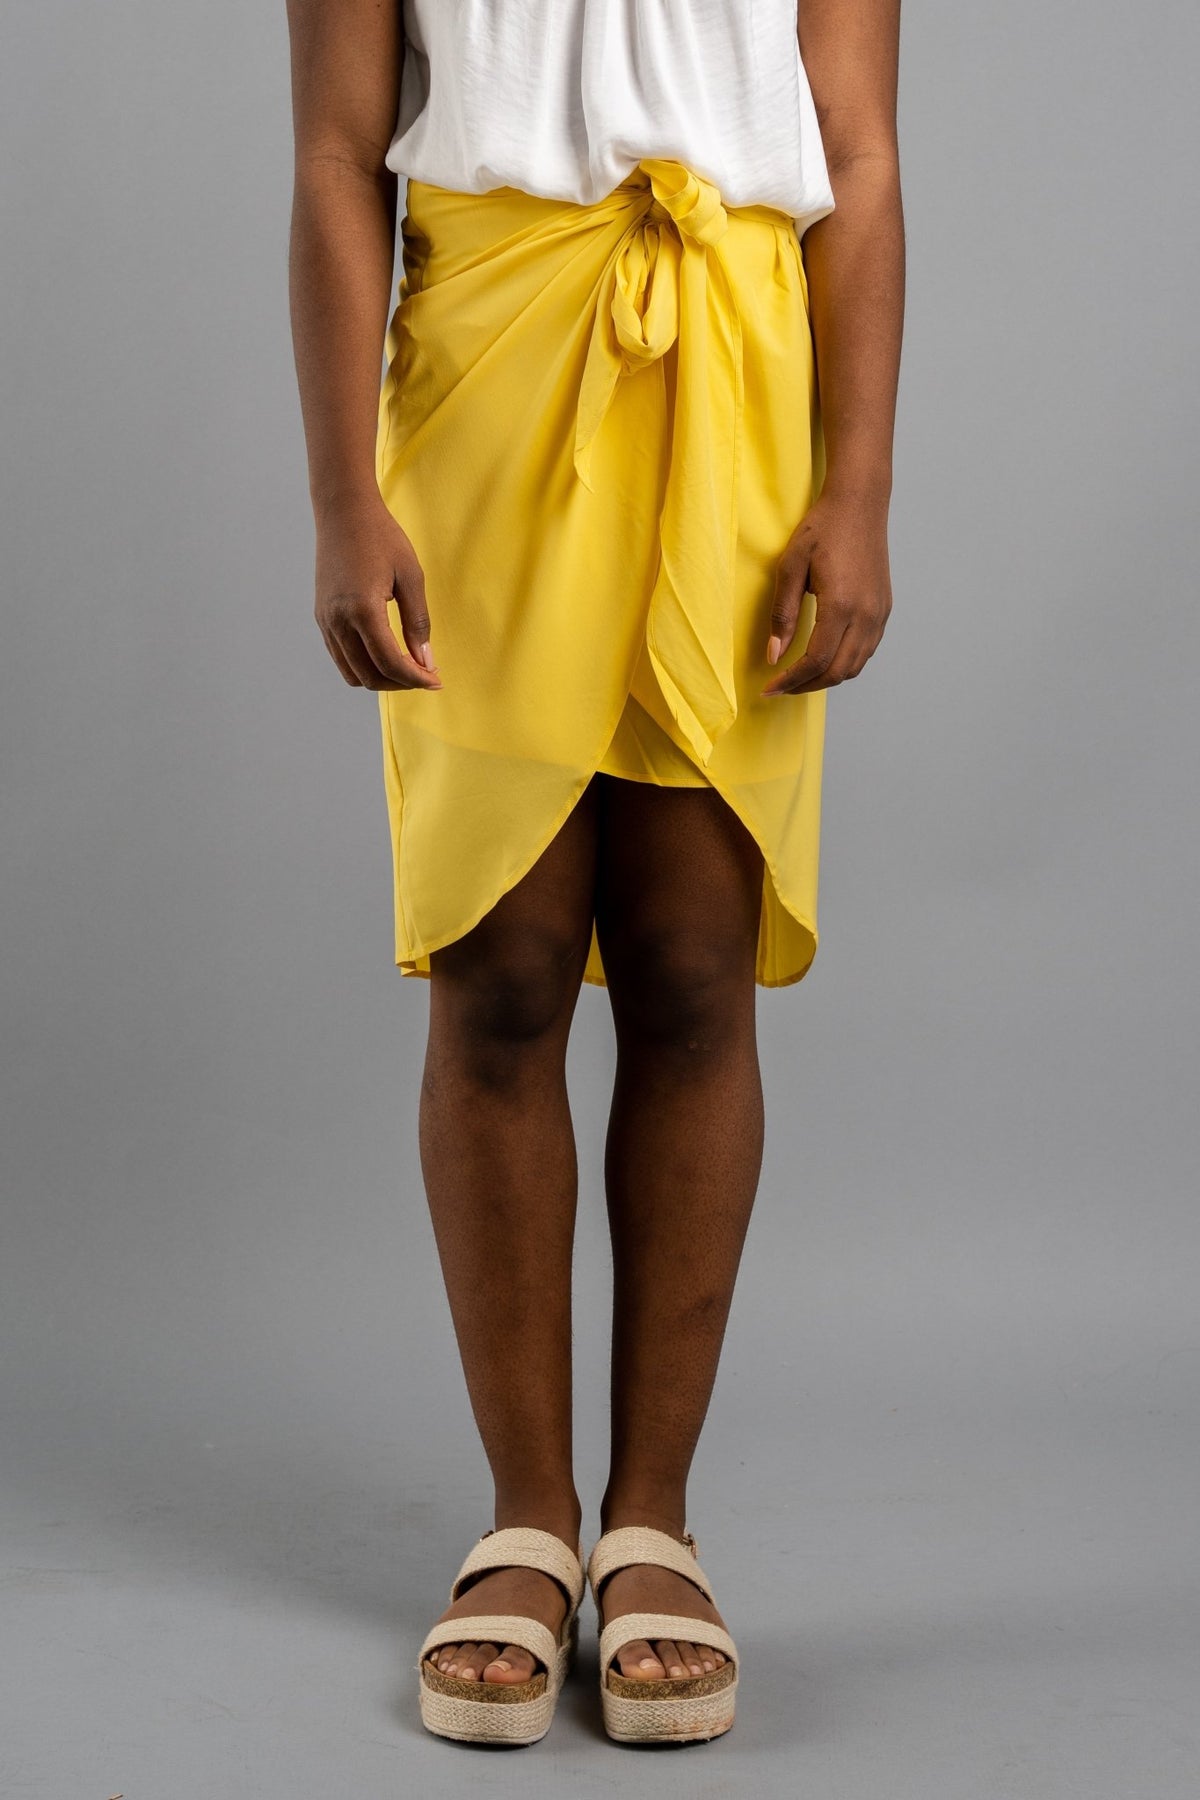 Front wrap midi skirt yellow fawn - Trendy Skirts - Cute Vacation Collection at Lush Fashion Lounge Boutique in Oklahoma City